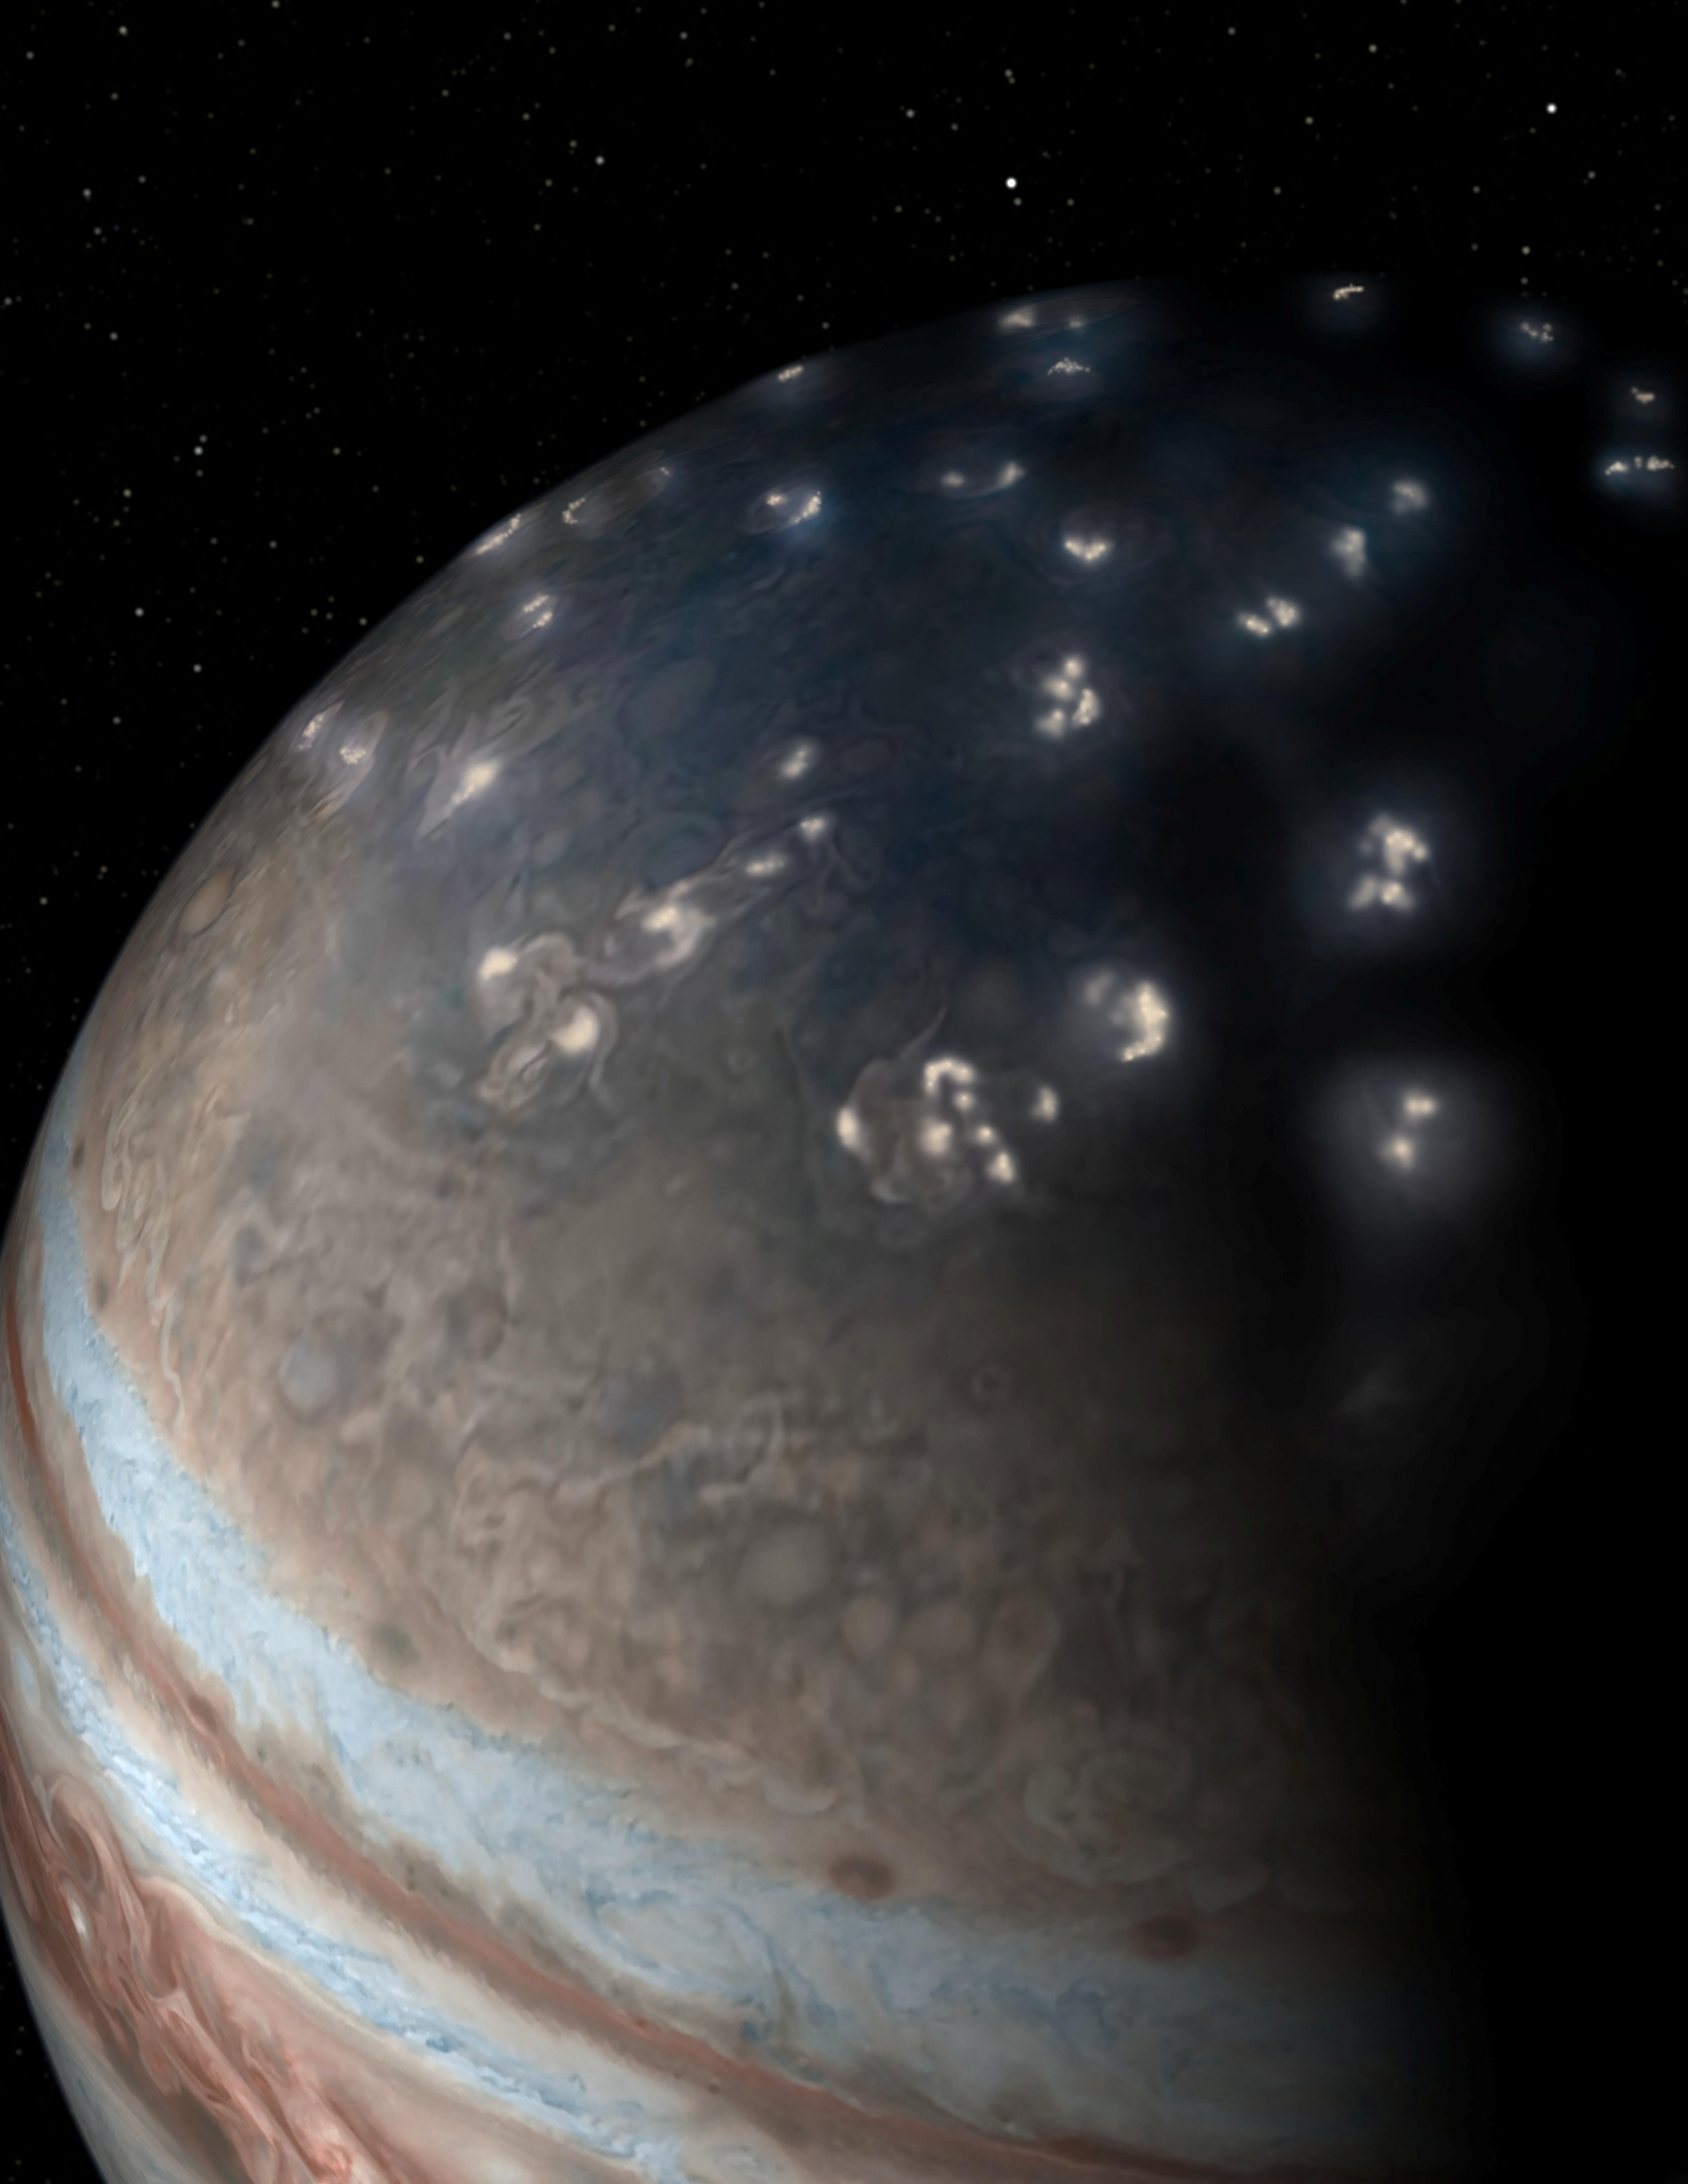 This artist's concept of lightning distribution in Jupiter's northern hemisphere incorporates a JunoCam image from the NASA spacecraft Juno with artistic embellishments